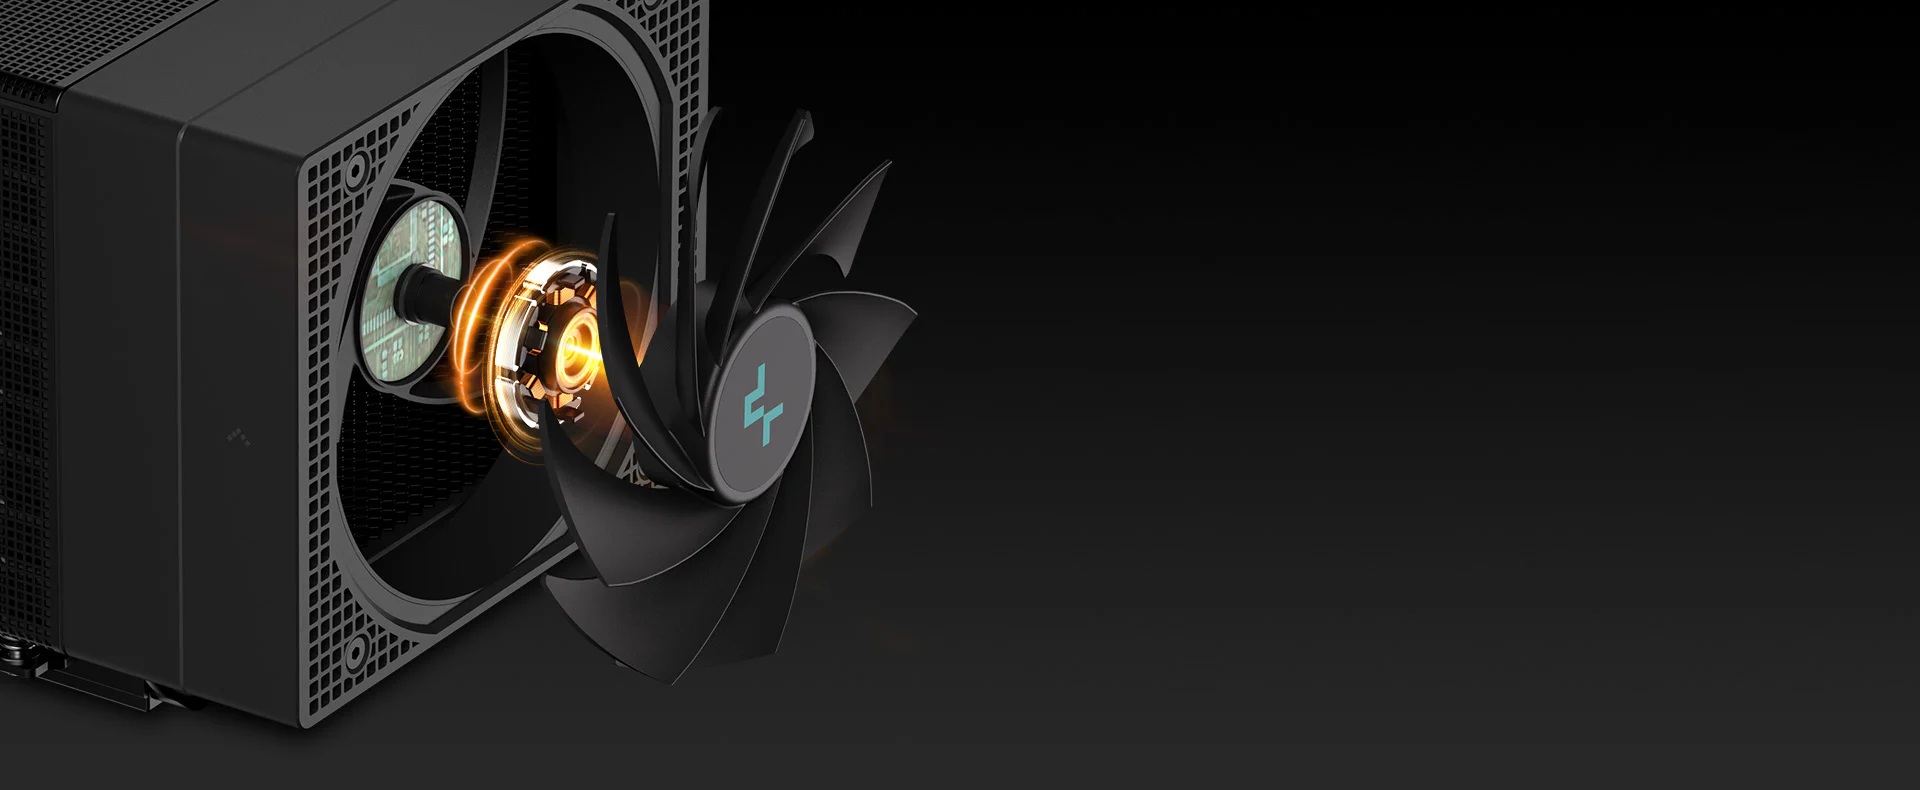 DeepCool Unveils The Mighty ASSASSIN IV CPU Cooler, New Digital AIOs, Fans  & CH560 Case